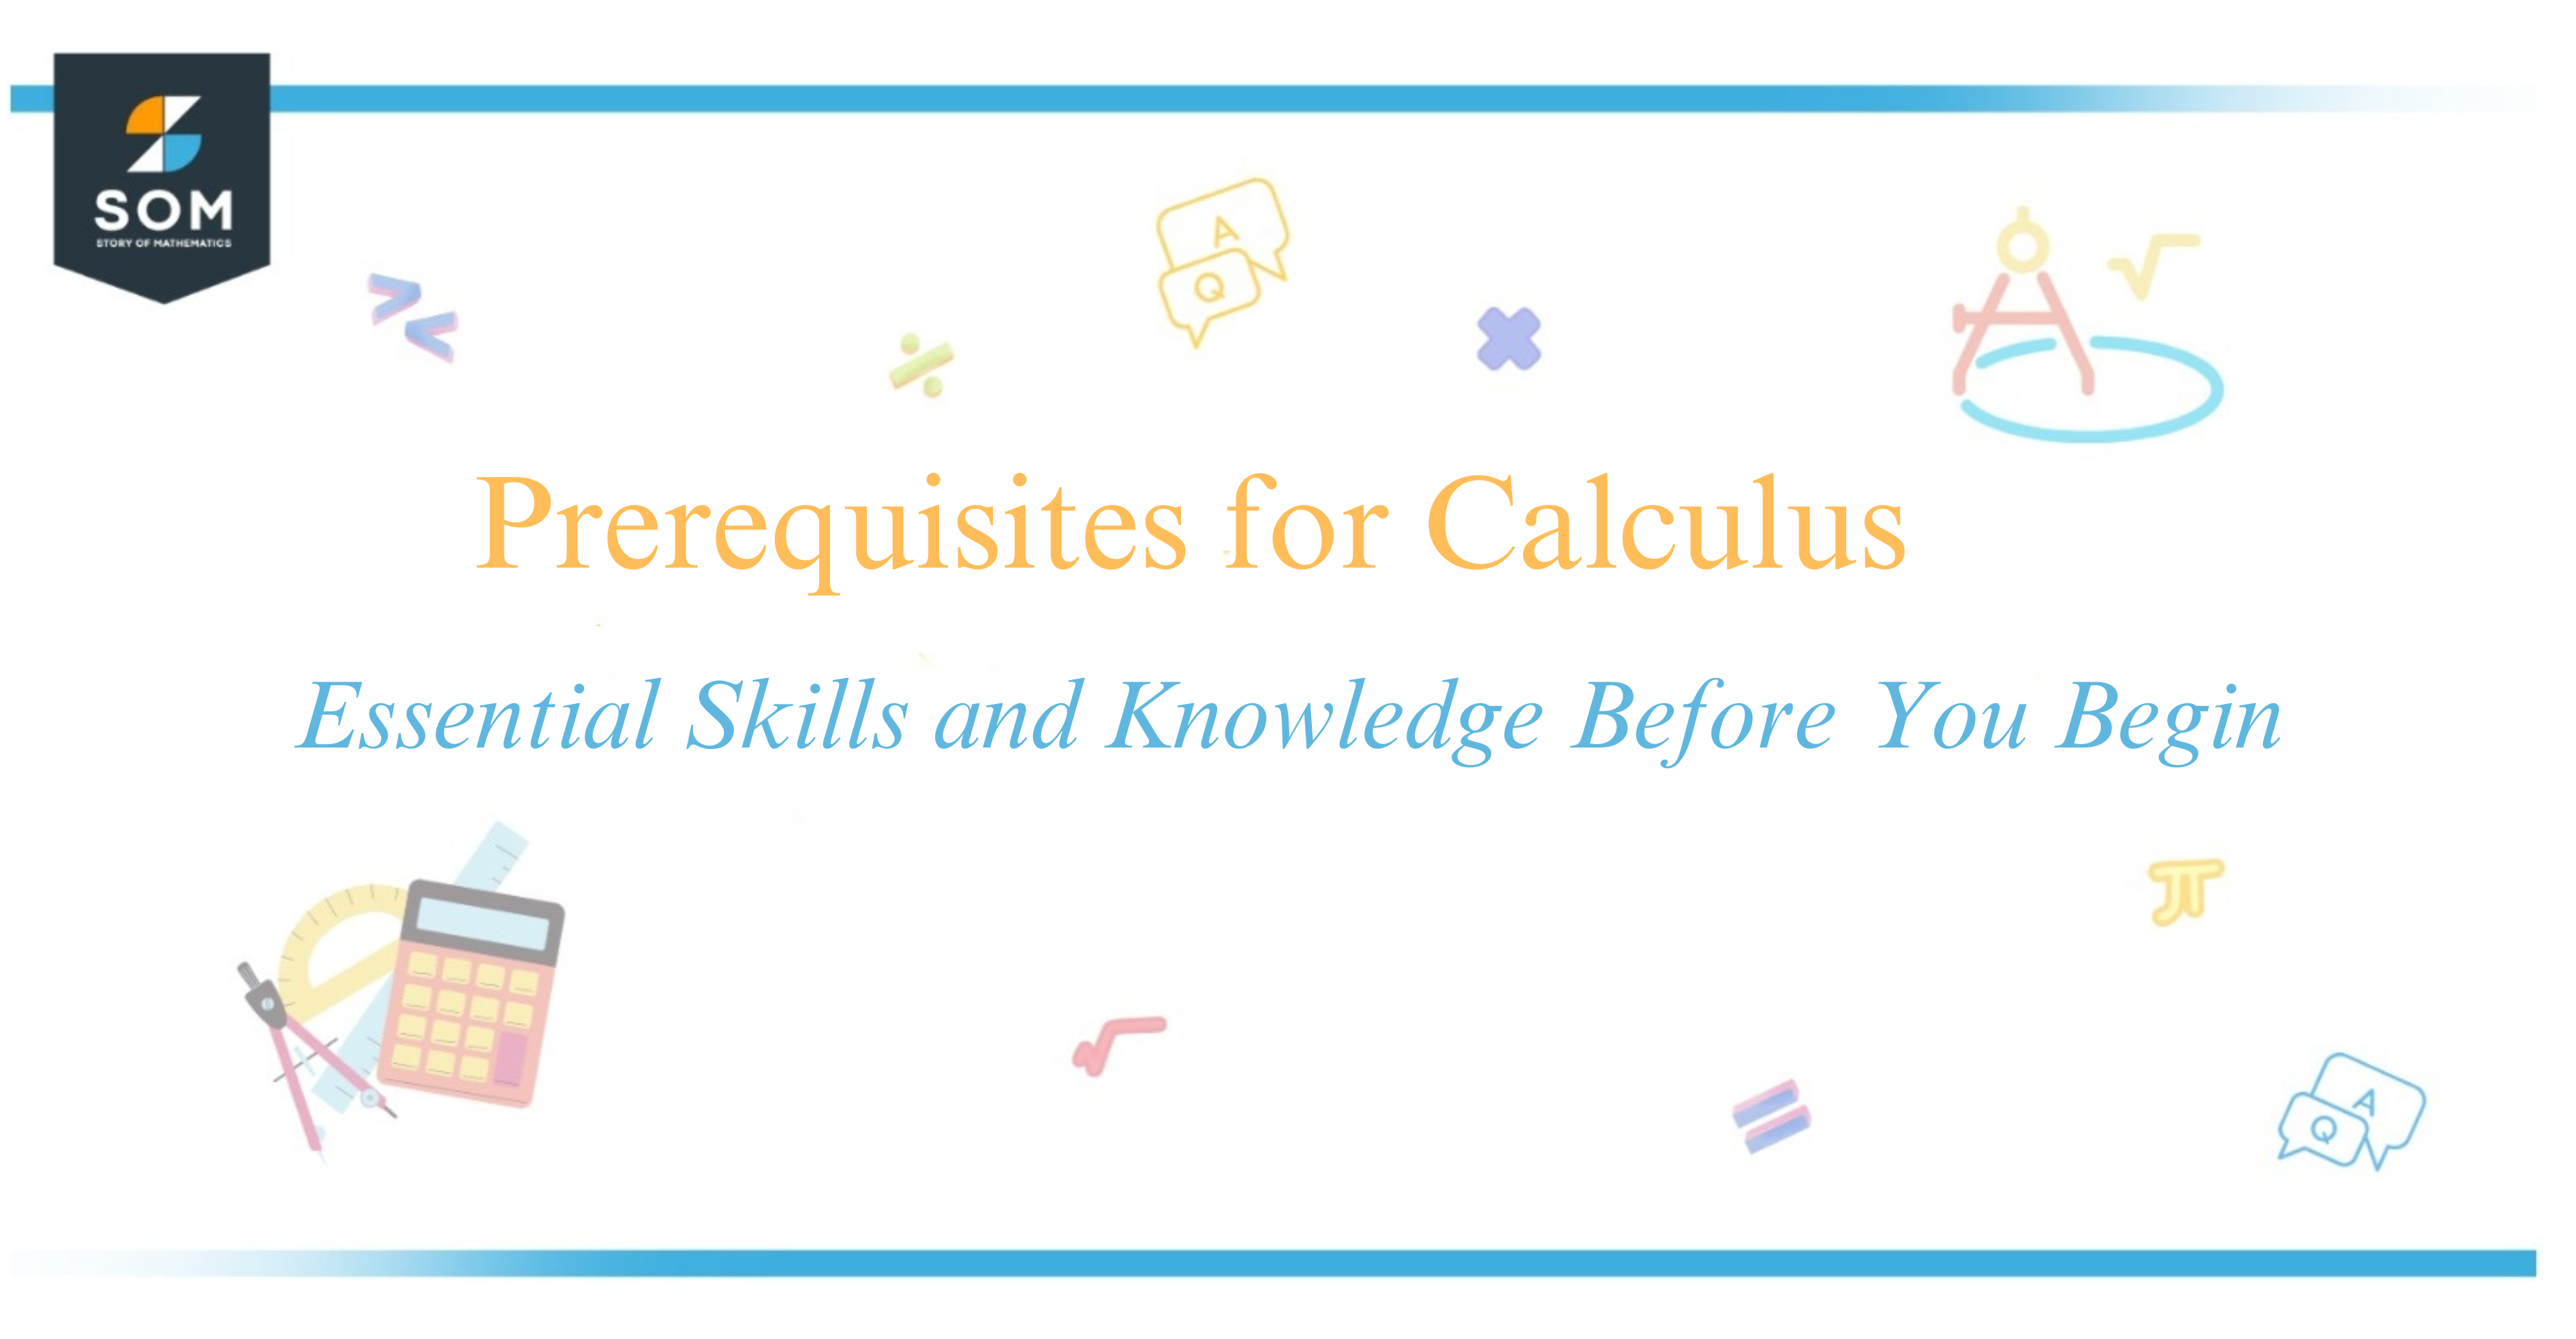 Prerequisites for Calculus Essential Skills and Knowledge Before You Begin